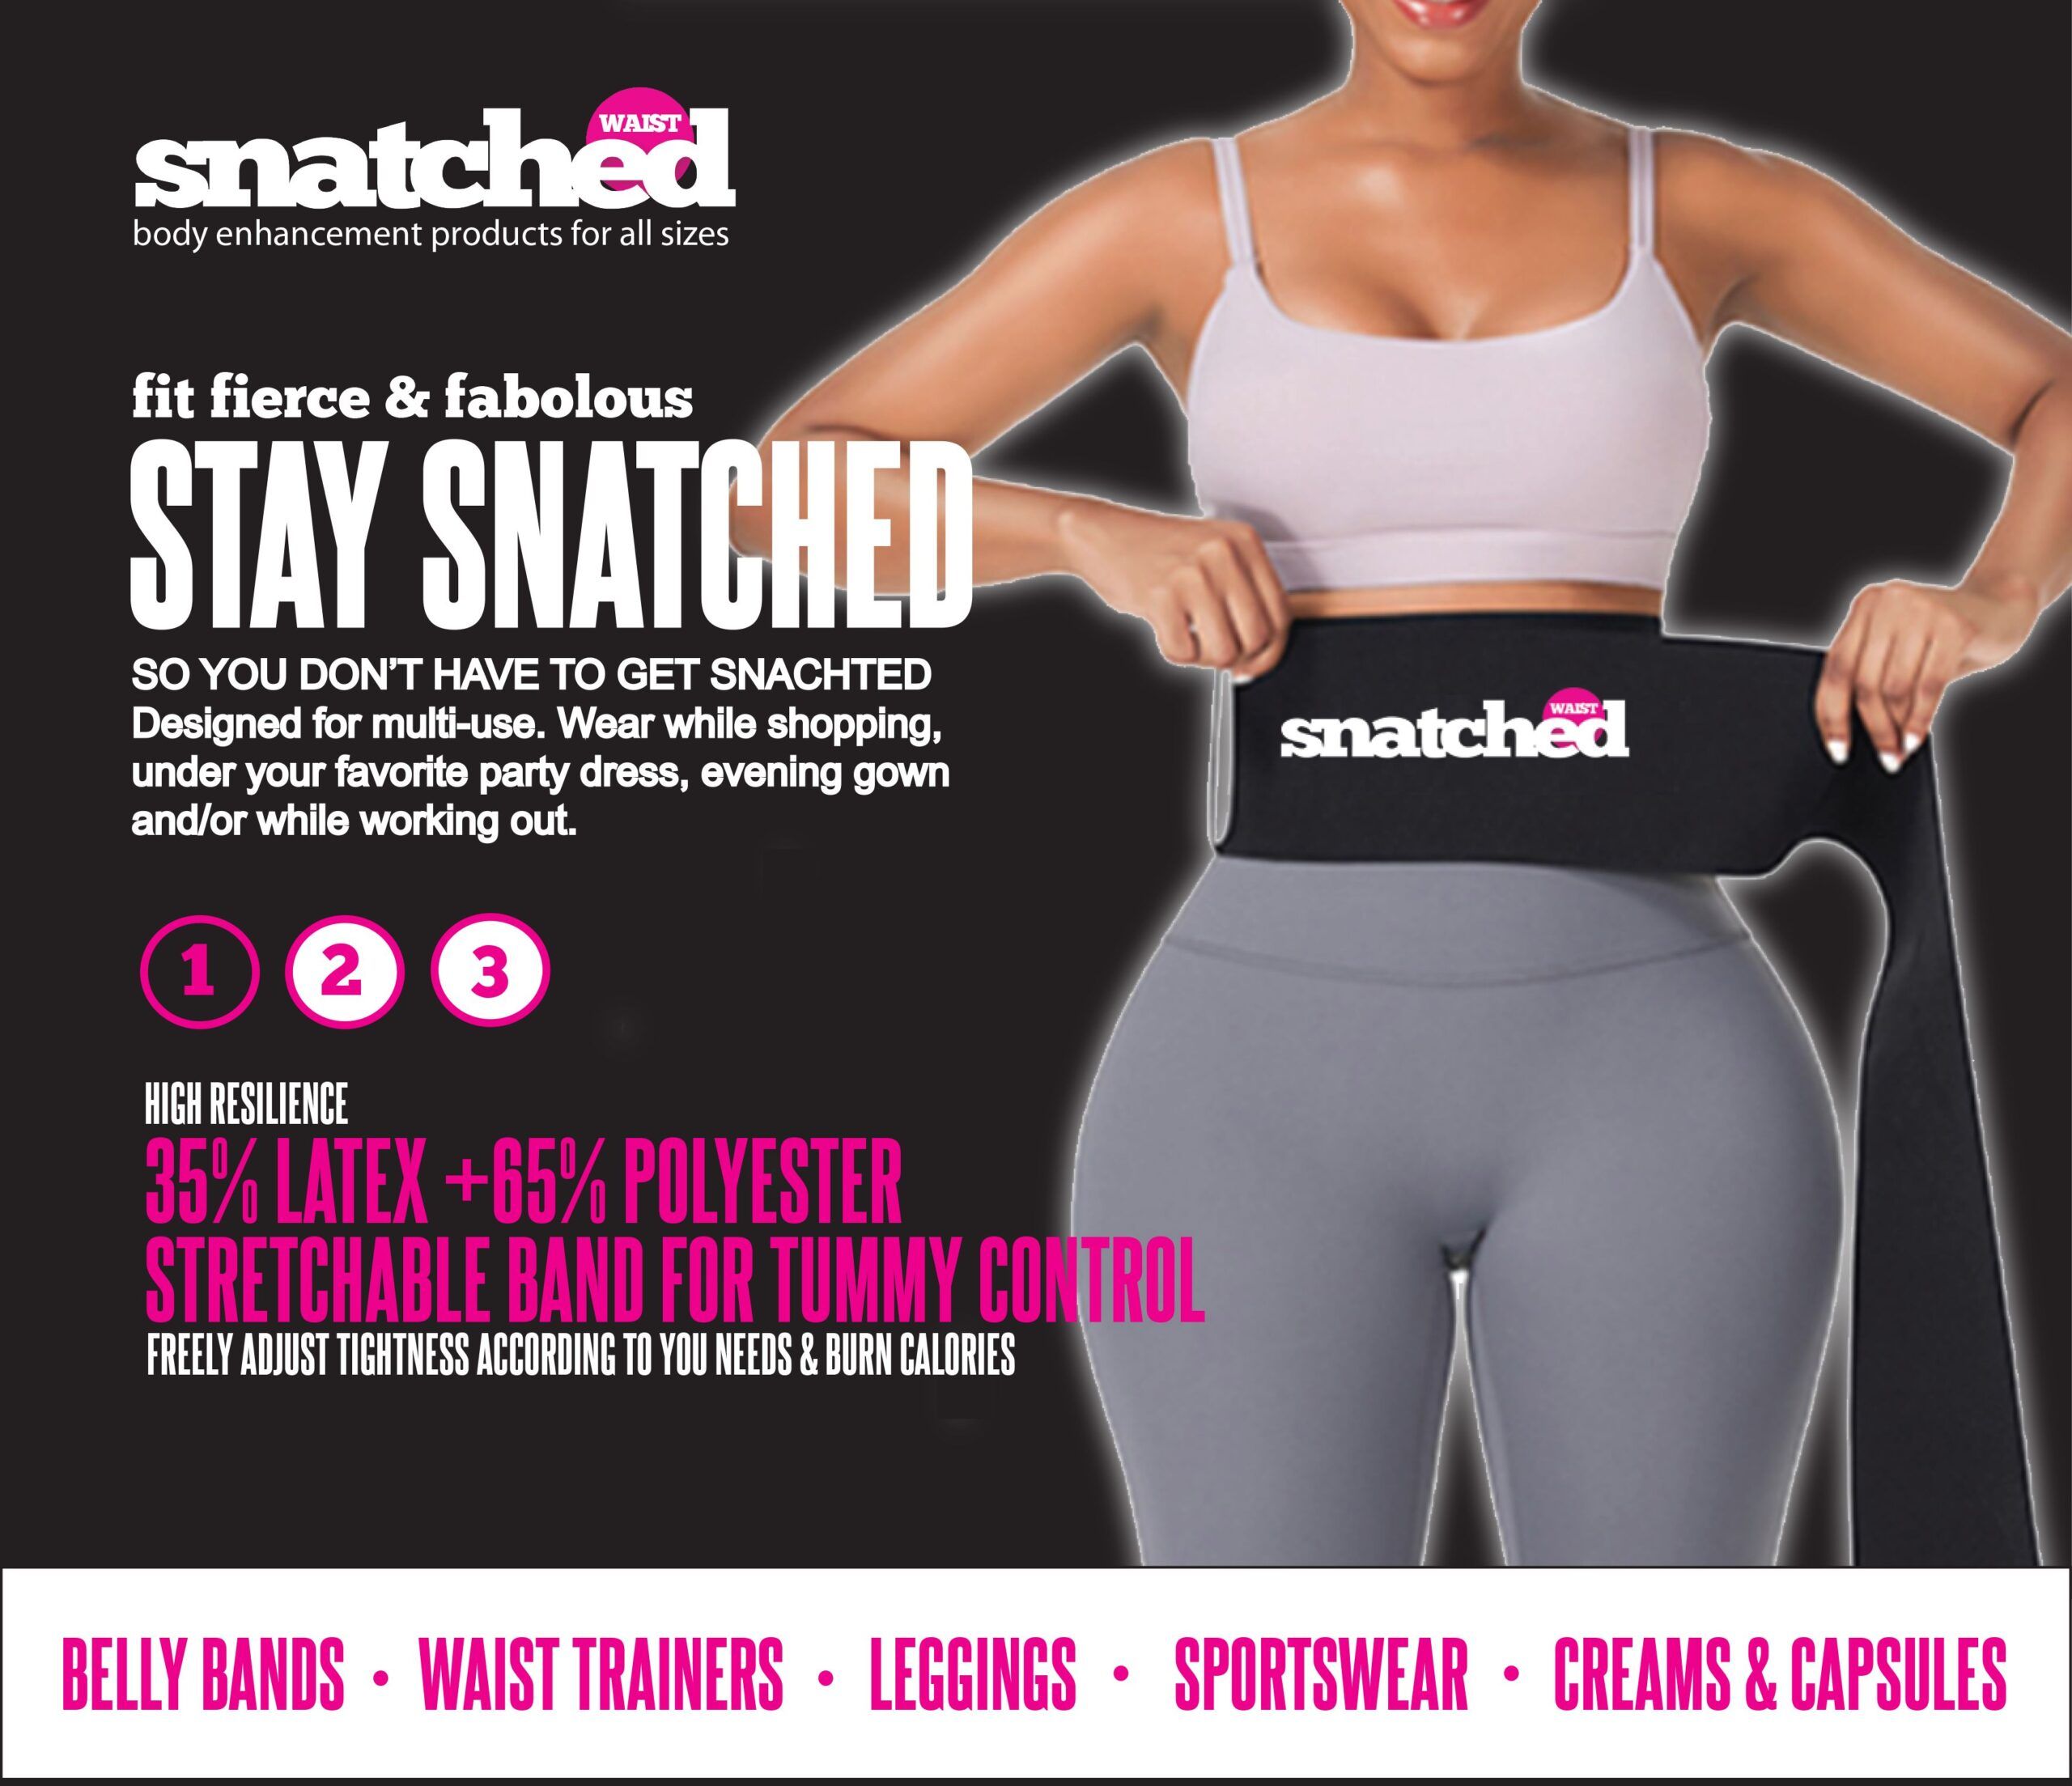 Snatched – Body Enhancement Products For All Sizes